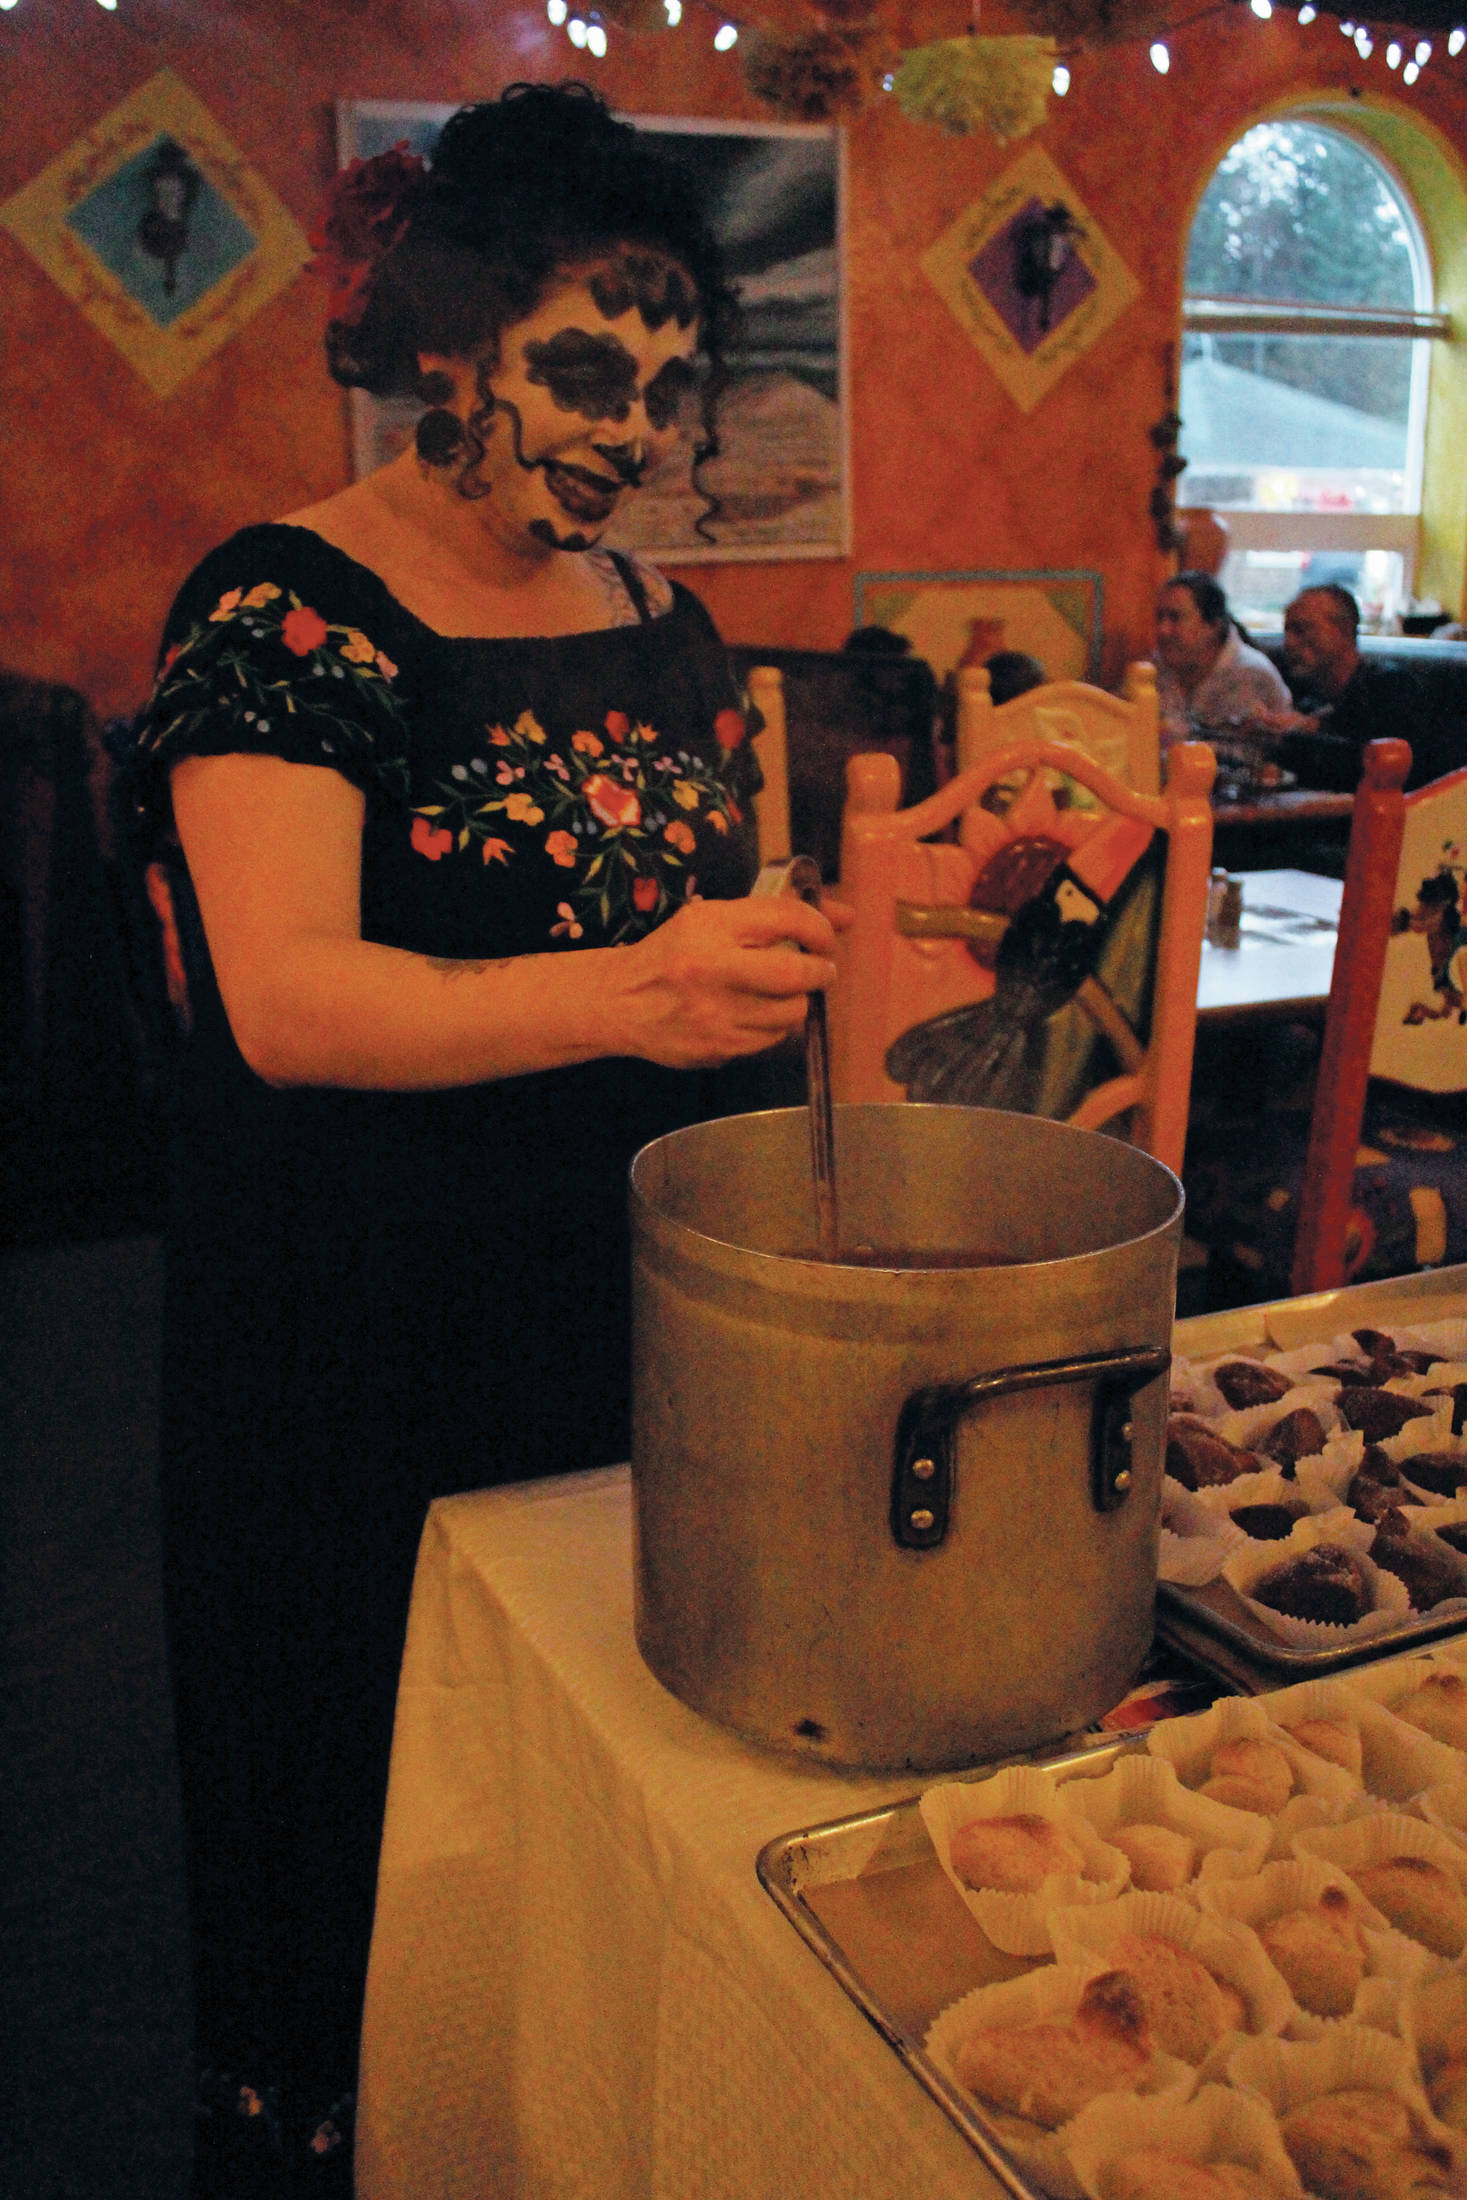 Evangelina Briggs of Homer Truffle Co. stirs drinking chocolate at a Dia de los Muertos celebration Saturday, Nov. 2, 2019 at Don Jose’s Mexican Restaurant in Homer, Alaska. (Photo by Megan Pacer/Homer News)